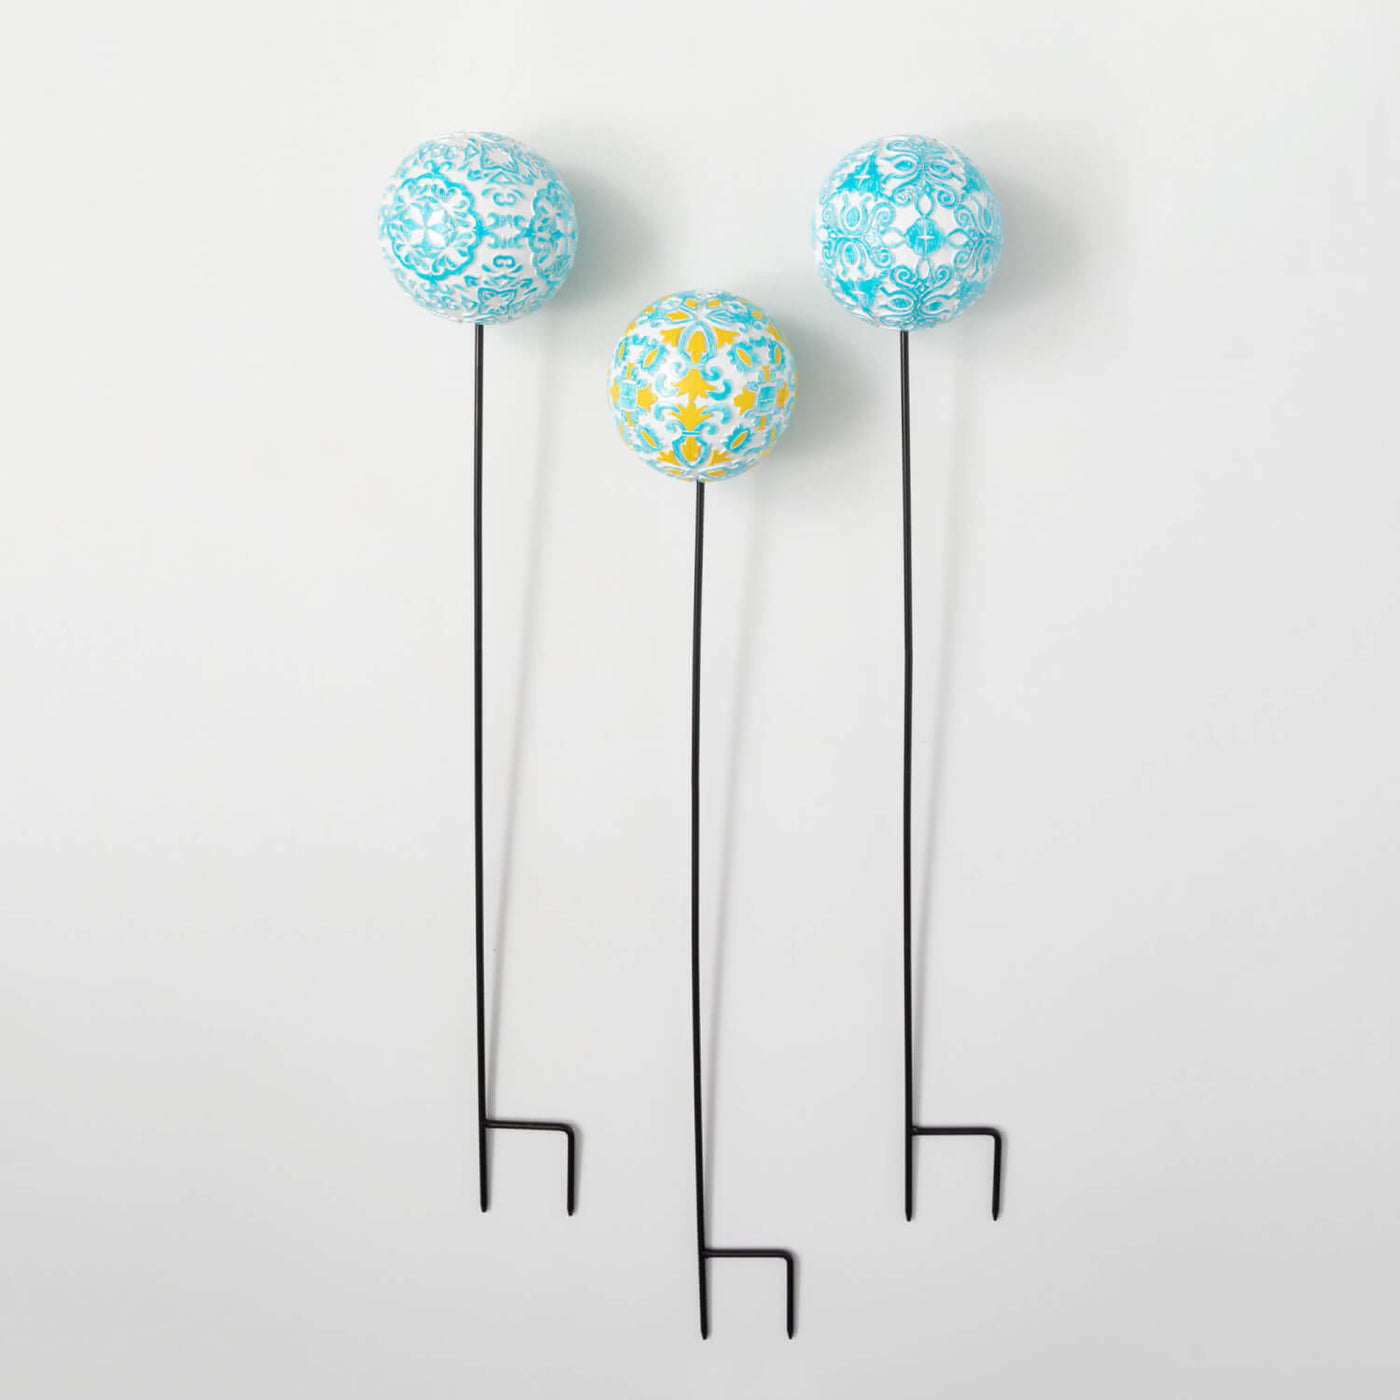 Set of 3 orb gardens stakes with various designs of blue, white, and yellow